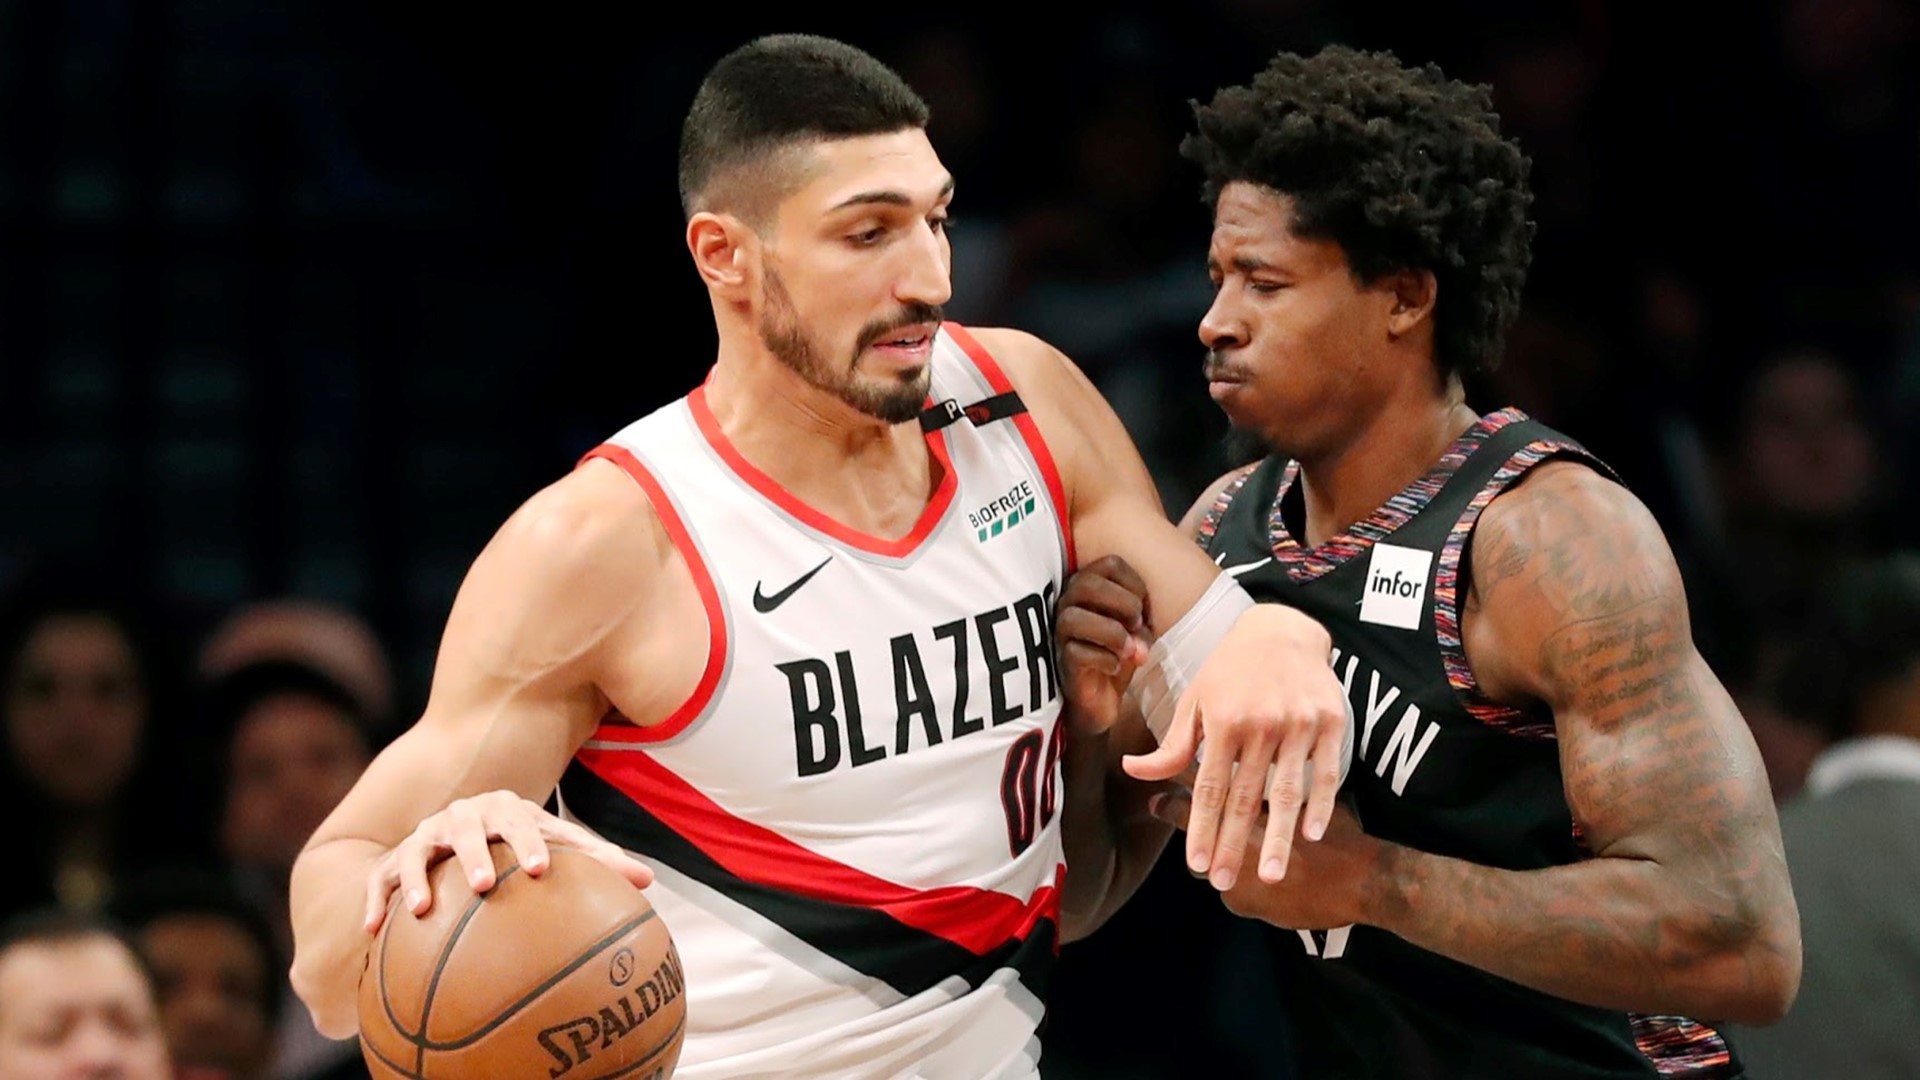 The Blazers are 36-23, on pace for exactly 50 wins this season. Will Portland reach the 50-win threshold for the first time since LaMarcus Aldridge left? KGW viewers chime in.